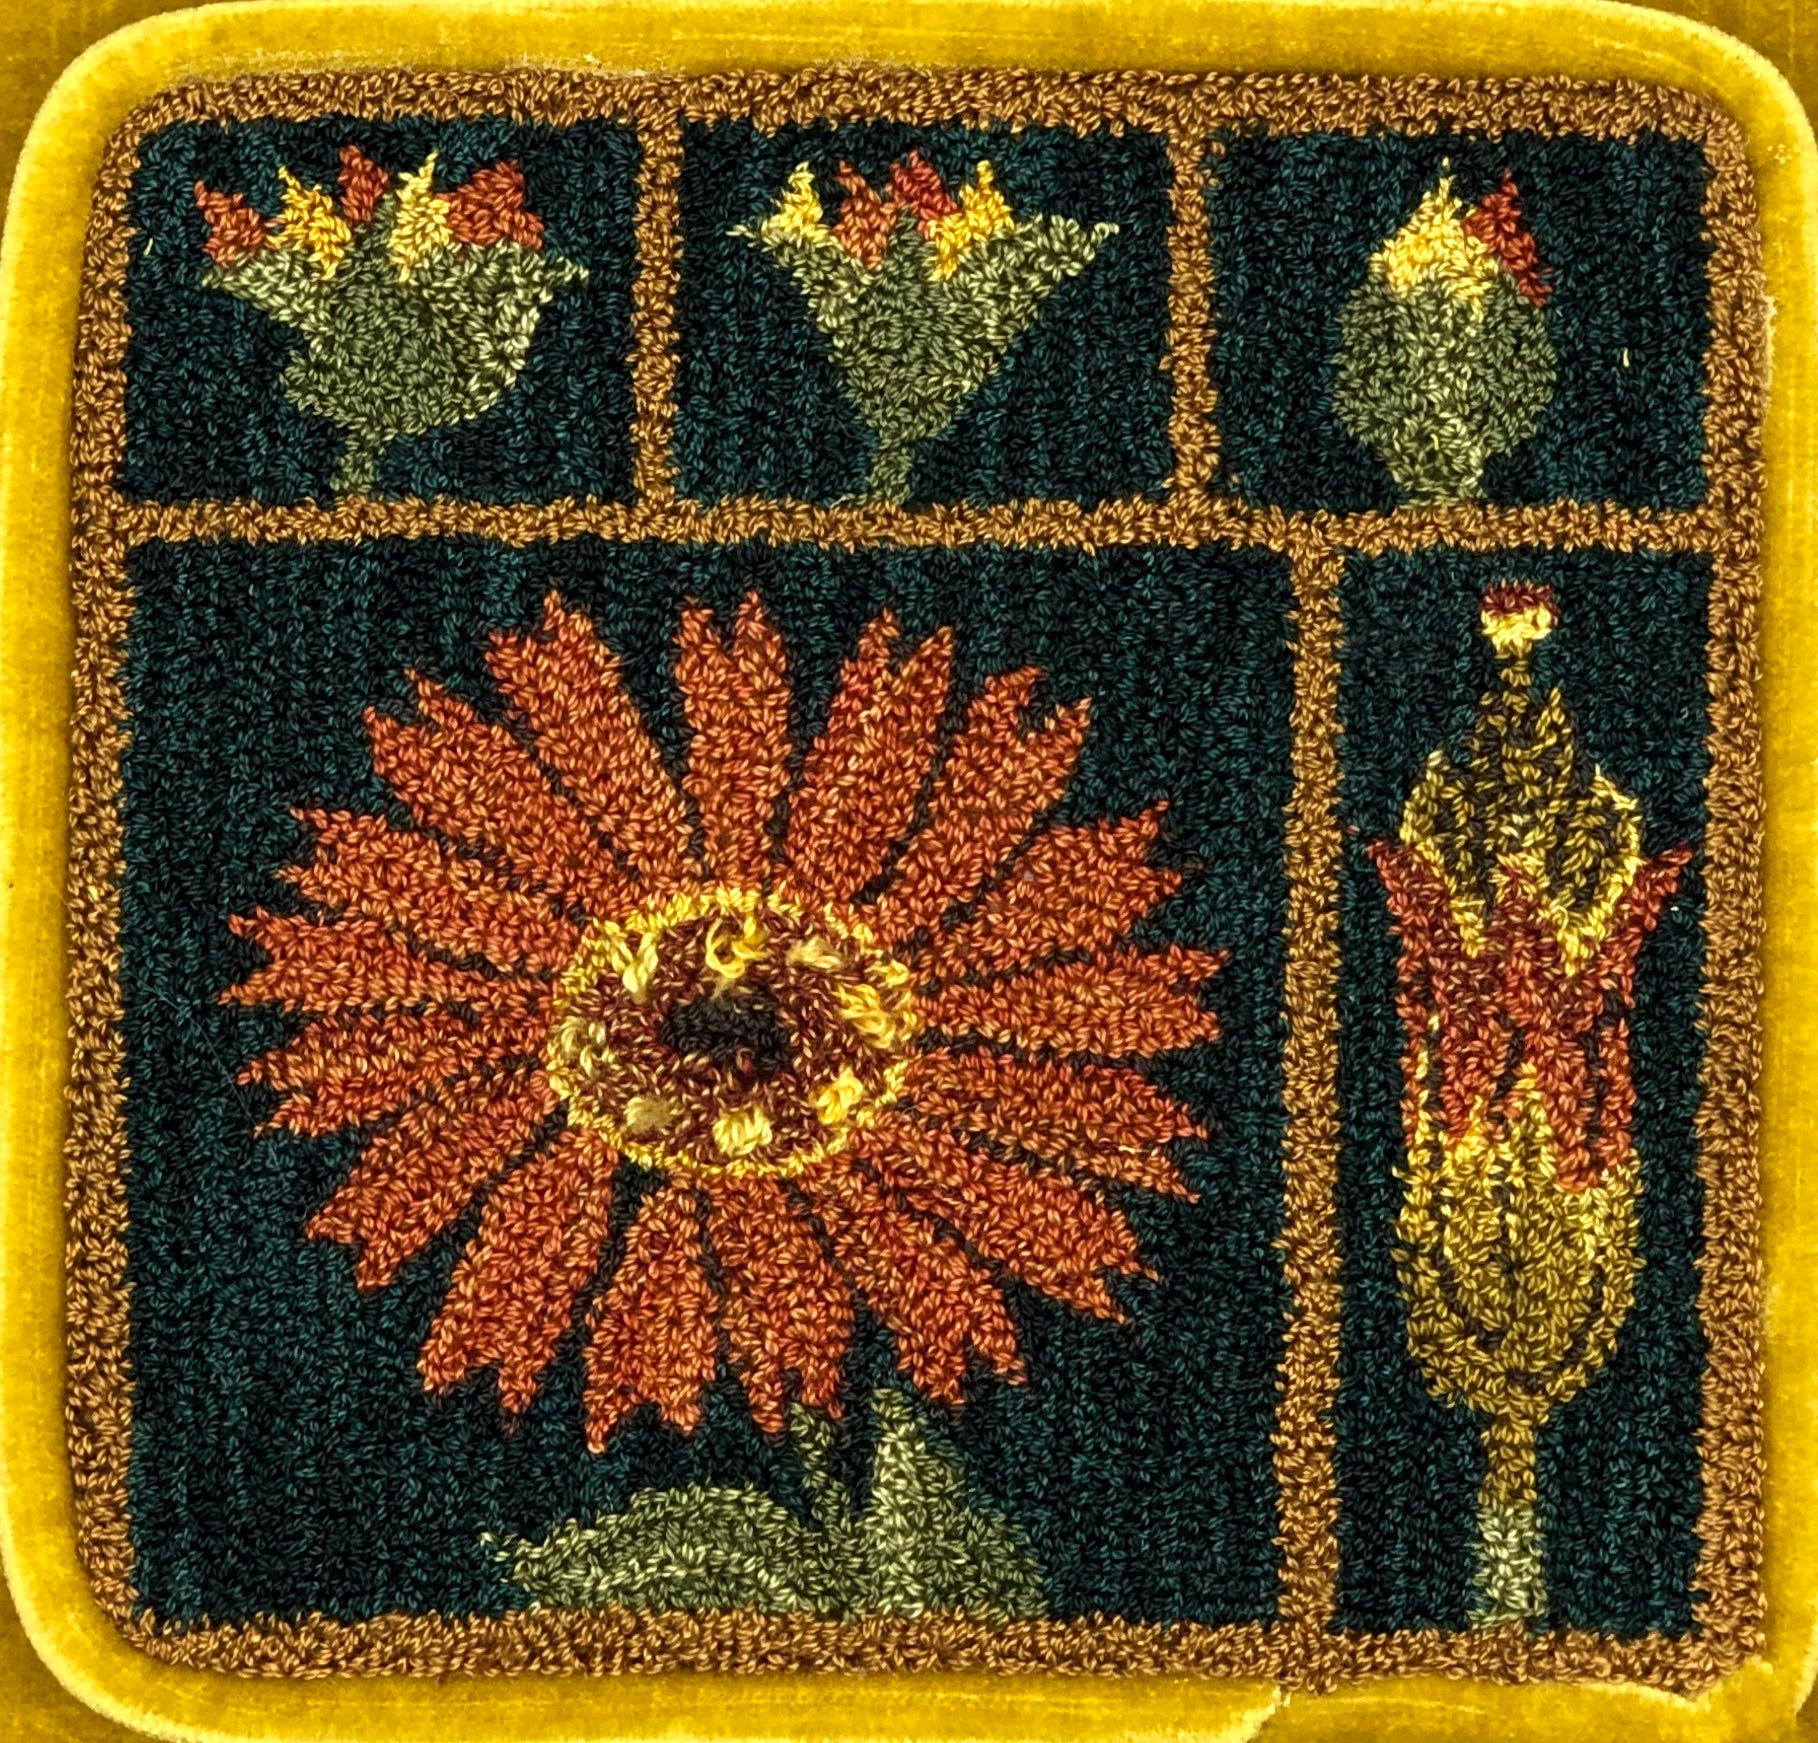 Marigold pattern is a rug hooking rug punch needle pattern, by Orphaned Wool that is hand-drawn on linen. This botanical pattern make a wonderful pillow or wall hanging design.